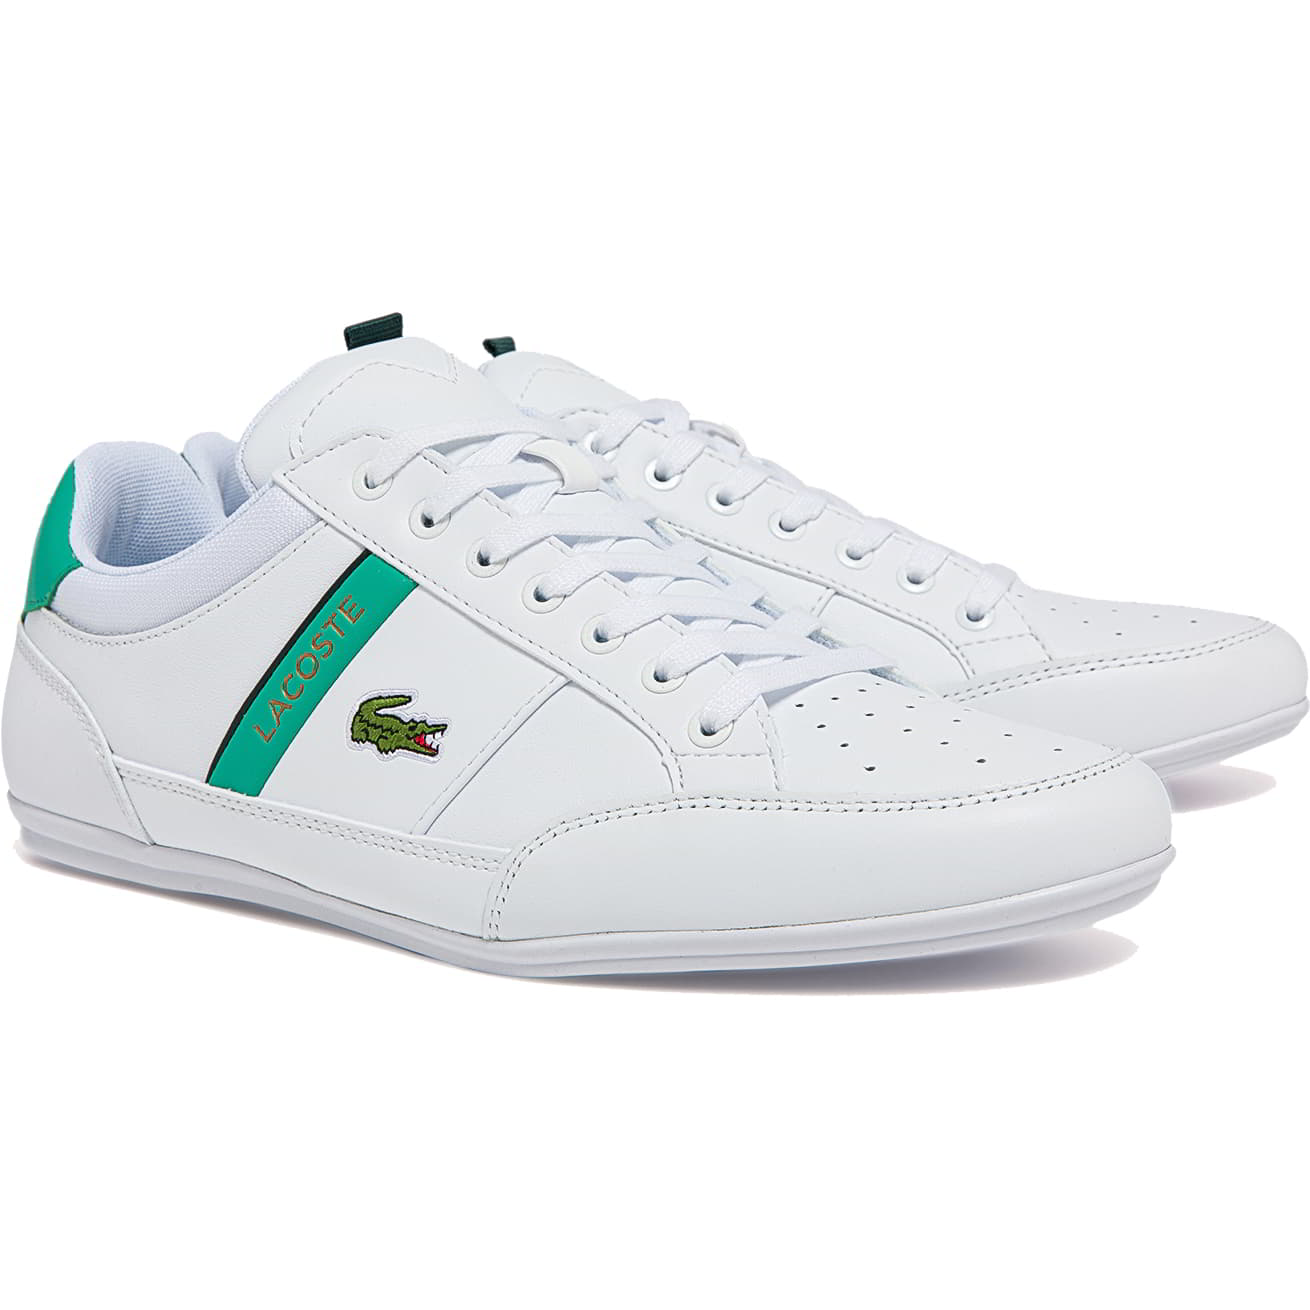 Lacoste Mens Chaymon 722-1 Leather Trainers - UK 9.5 White 2951